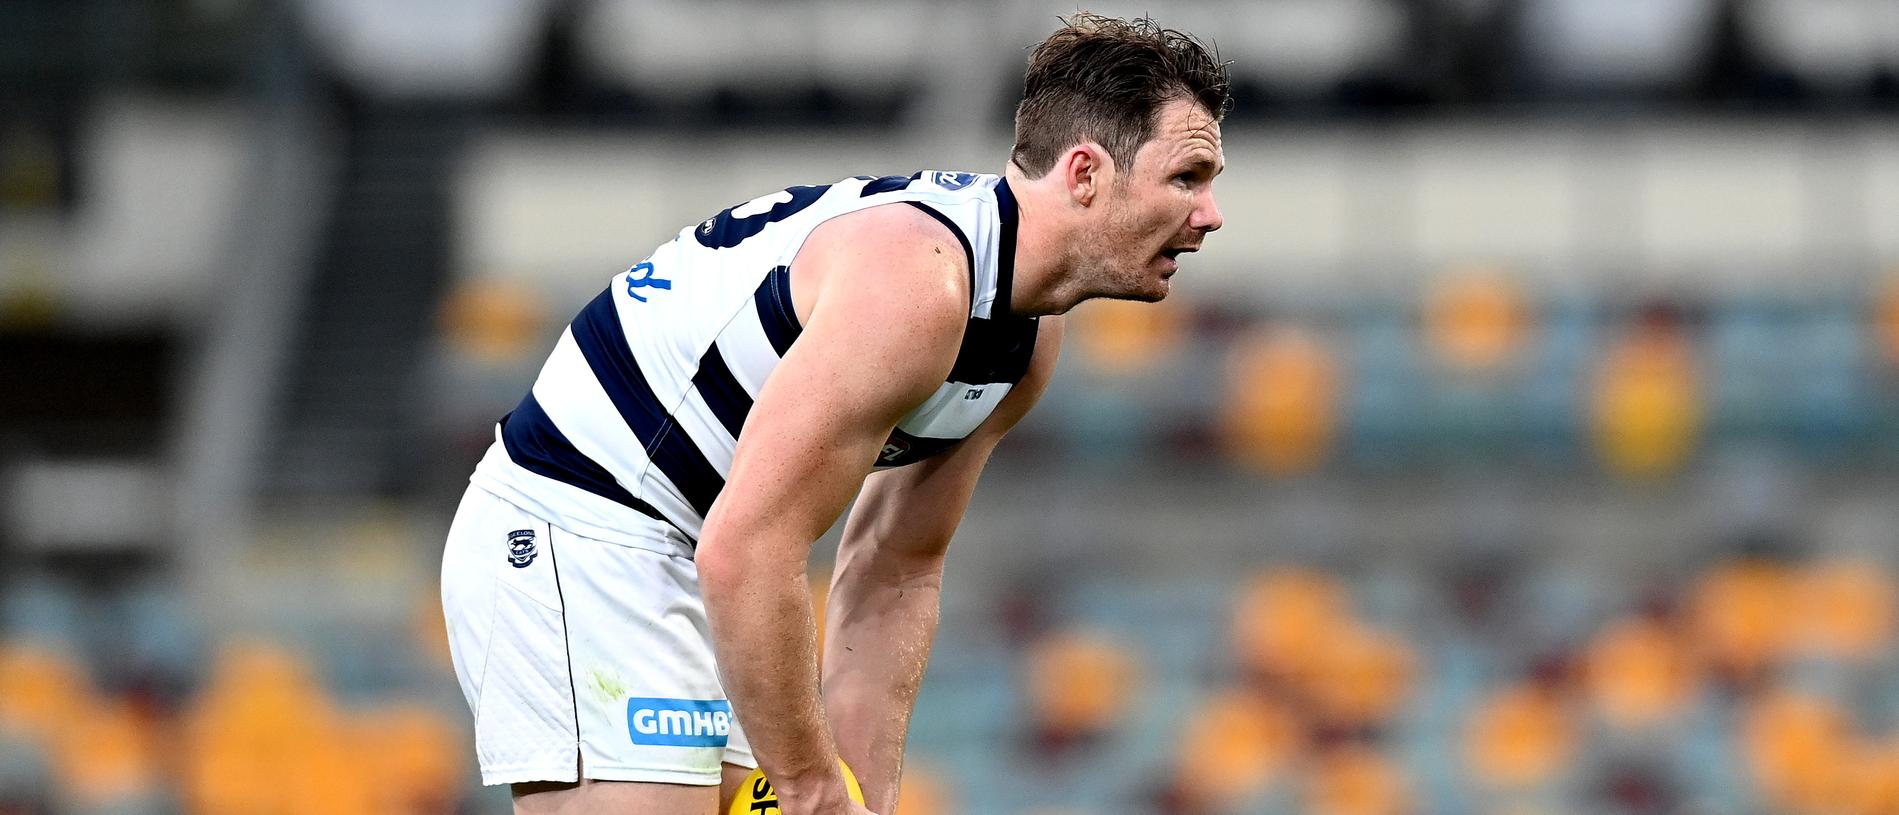 BRISBANE, AUSTRALIA - SEPTEMBER 06: Patrick Dangerfield of the Cats lines up a kick during the round 16 AFL match between the Geelong Cats and the Essendon Bombers at The Gabba on September 06, 2020 in Brisbane, Australia. (Photo by Bradley Kanaris/Getty Images)